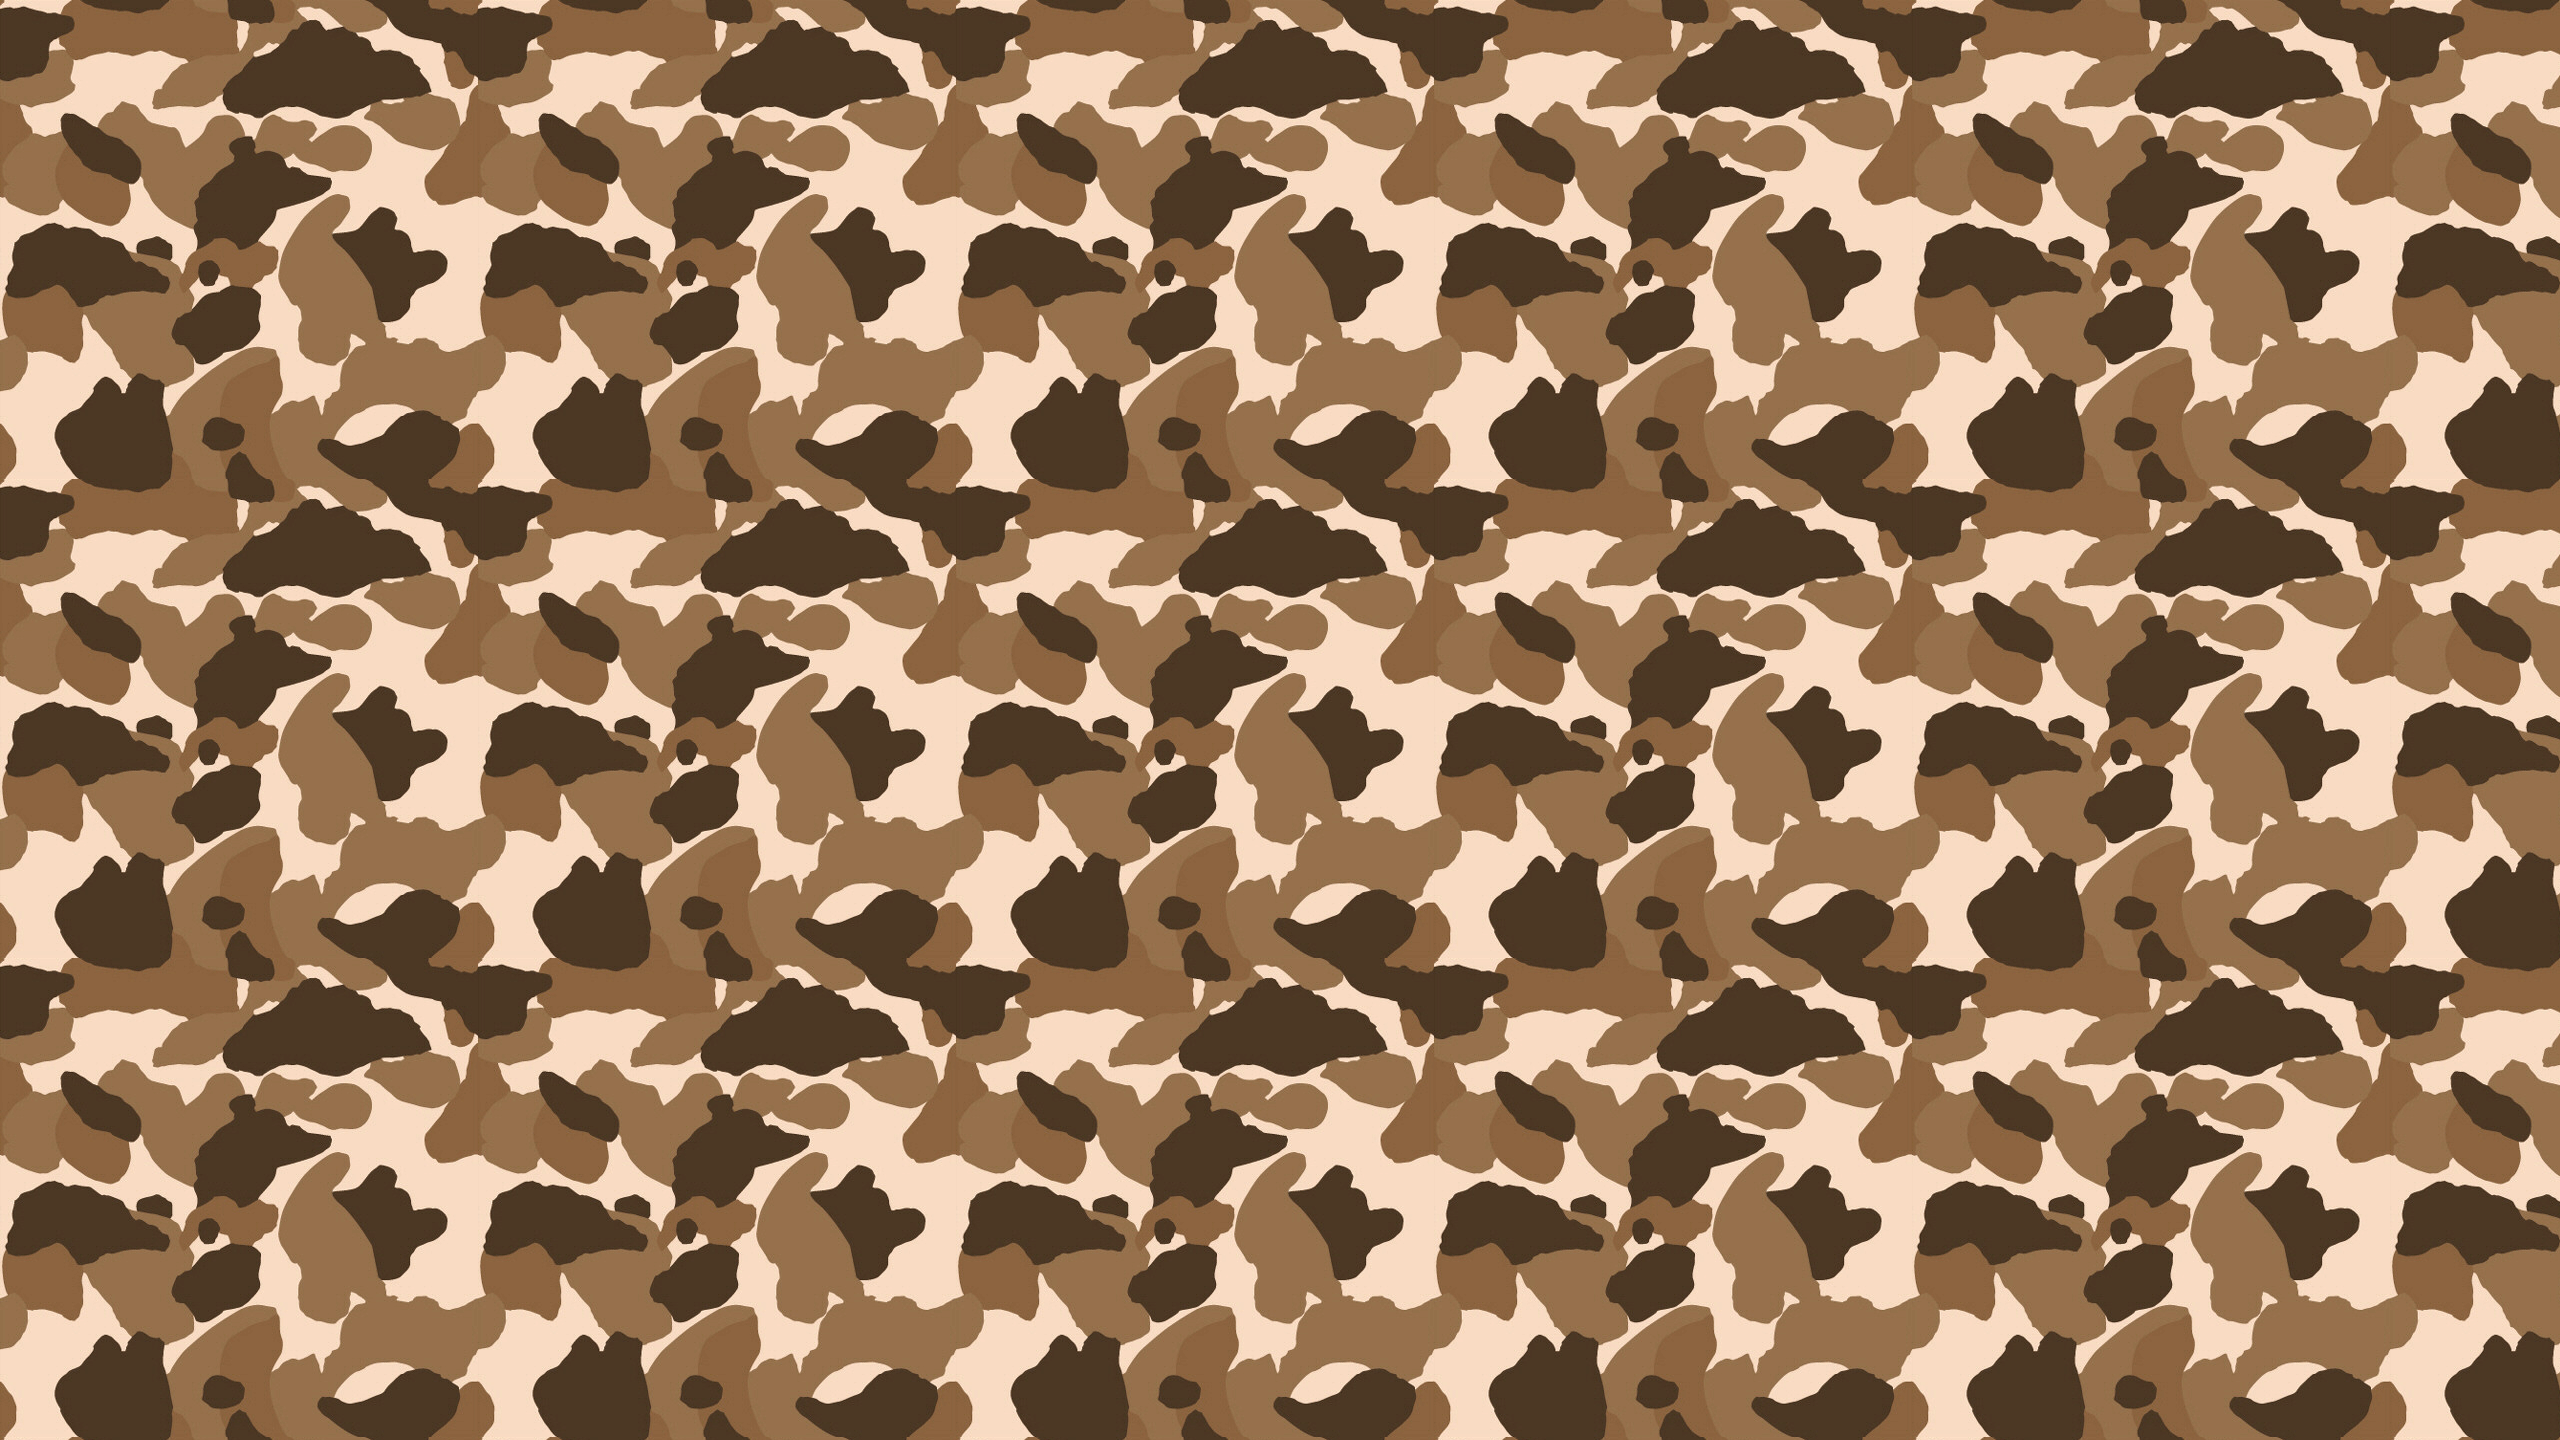  Pictures realtree color camo fabric by the yard on sale realtree com 2560x1440